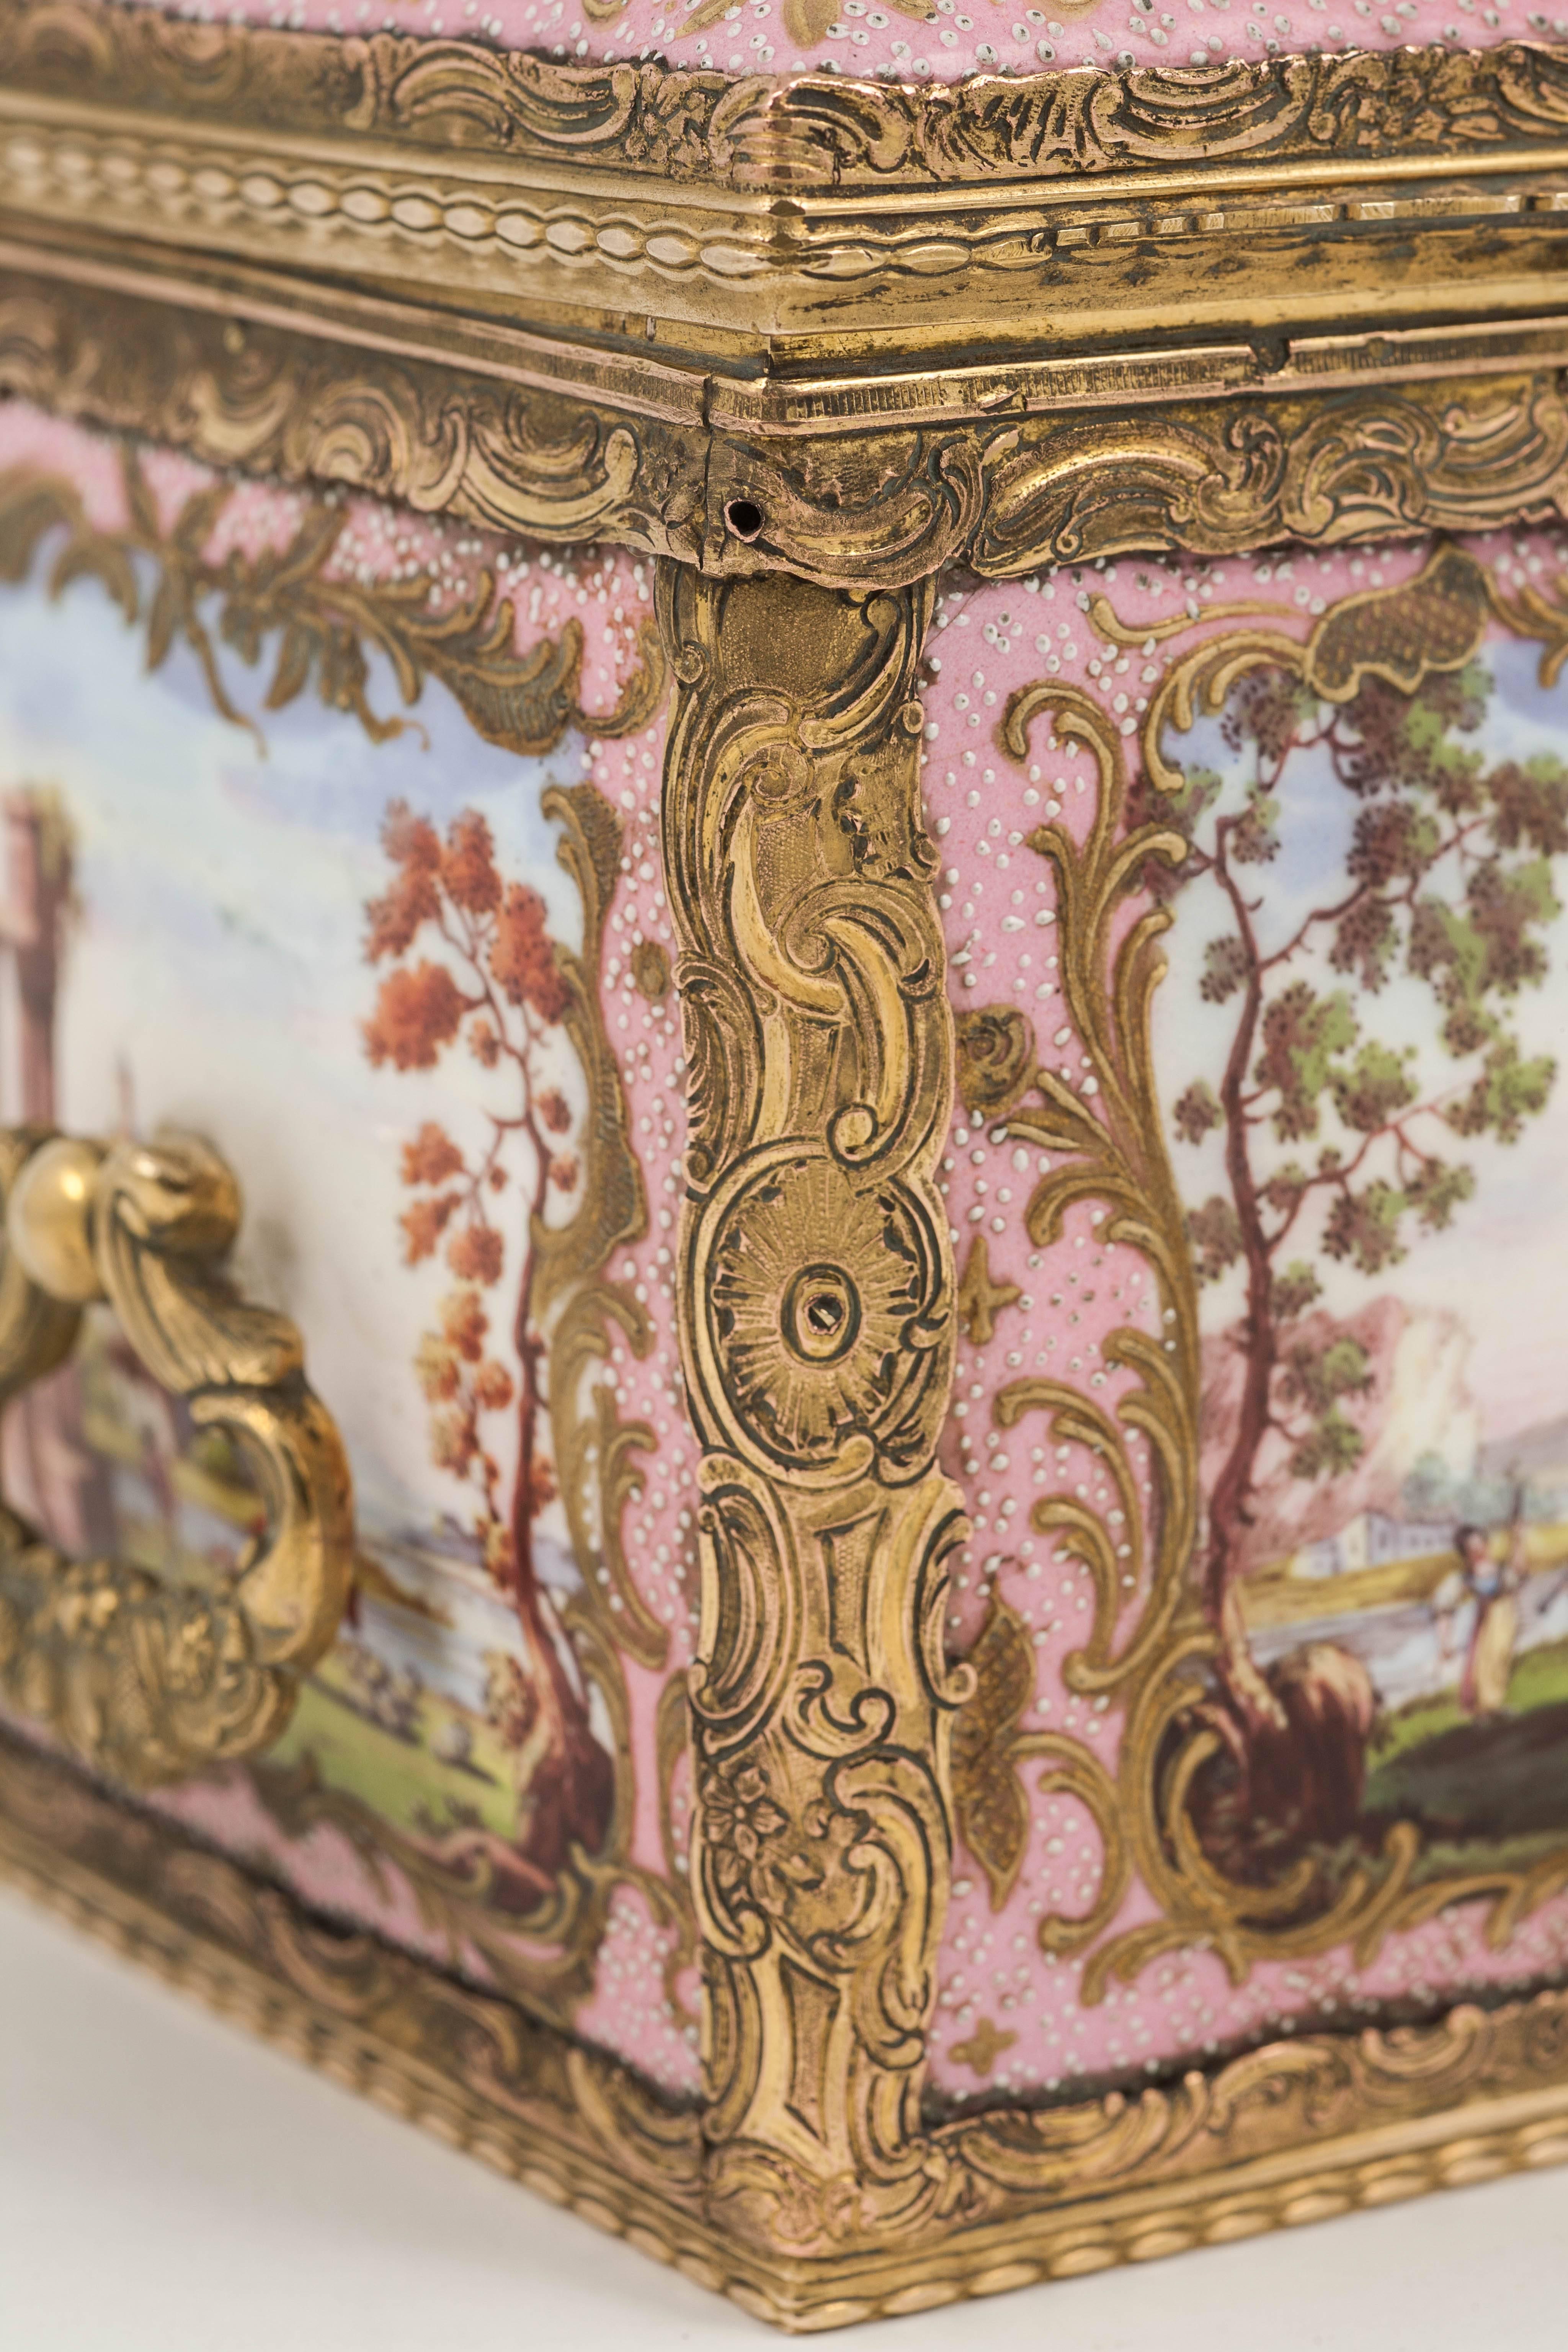 Beautifully decorated with classical landscapes, within gilded scrollwork, against a pale pink background. 

A similar example may be seen at the Victoria and Albert Museum, London.

This fine hand-painted casket is not only a rare survival, but